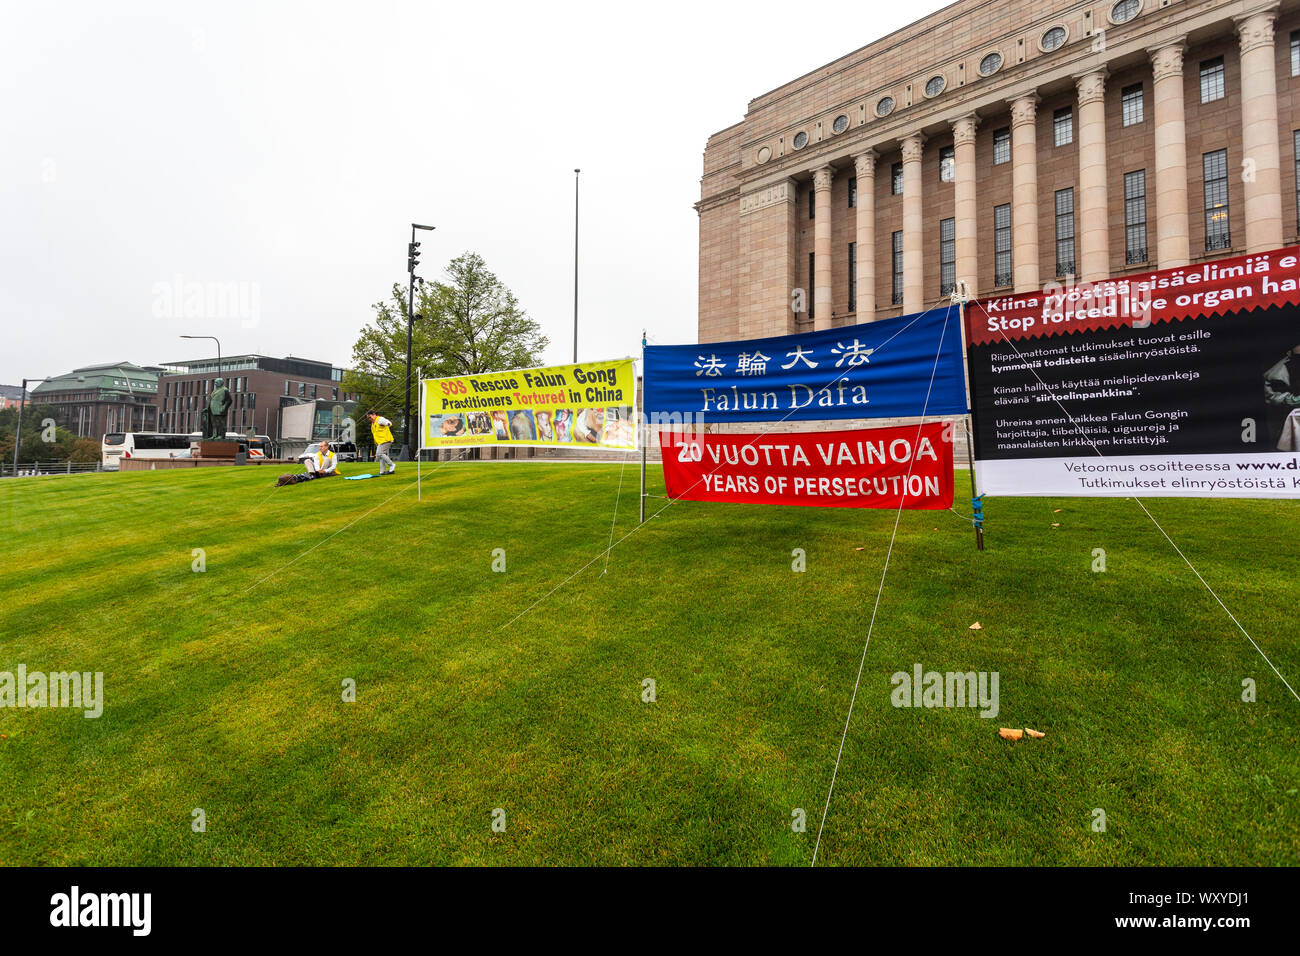 Falun Gong protest in front of Parliament House, Helsinki, Finland 2019. Banner reads: Rescue Falun Gong Practitioner Tortured in China Stock Photo